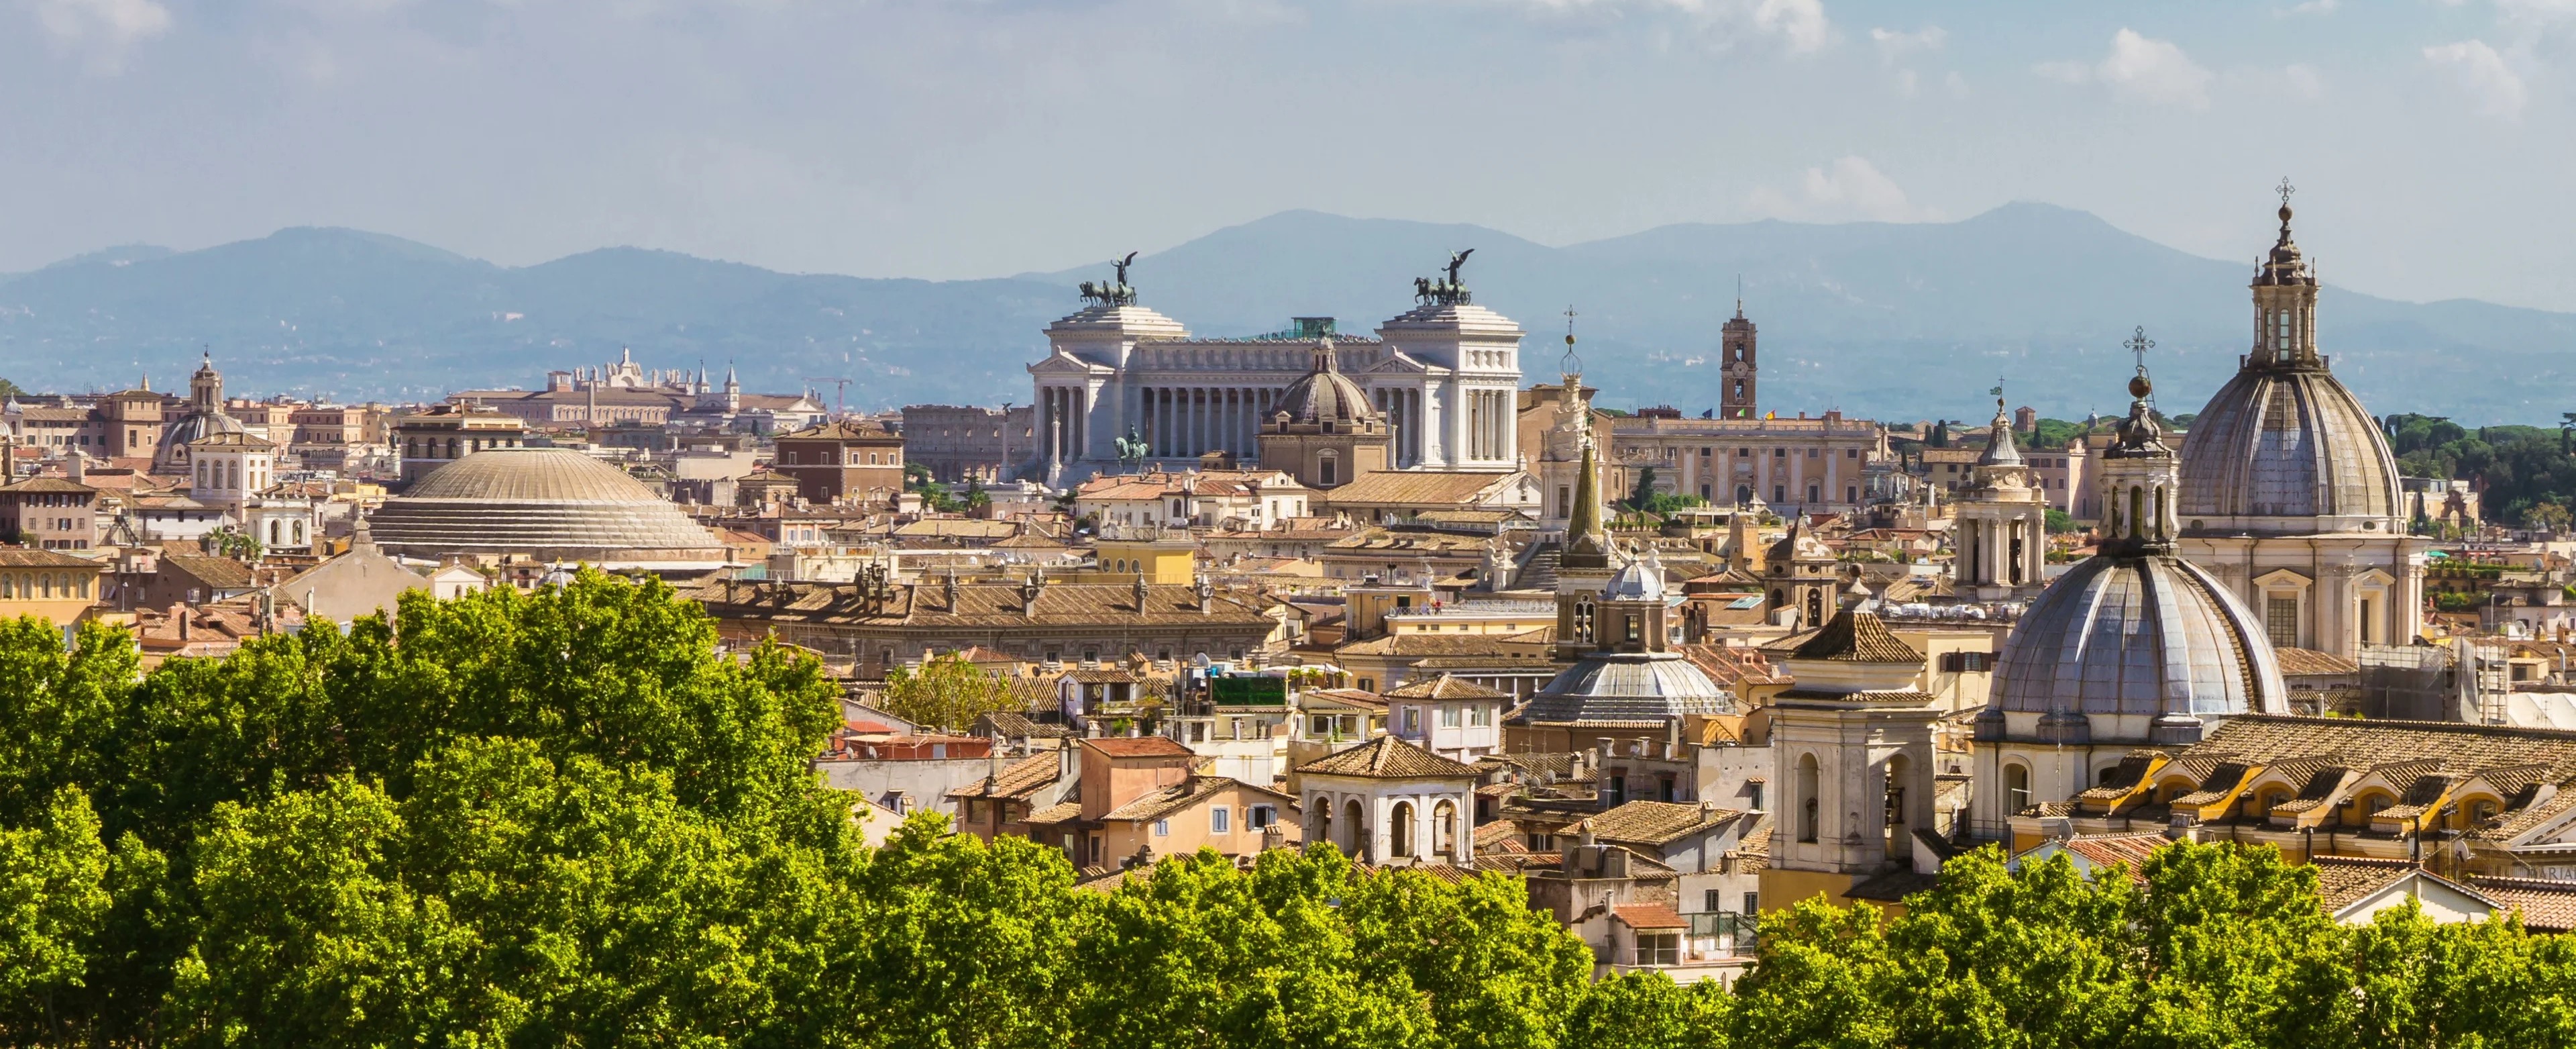 Rome Skyline at Mid-Day